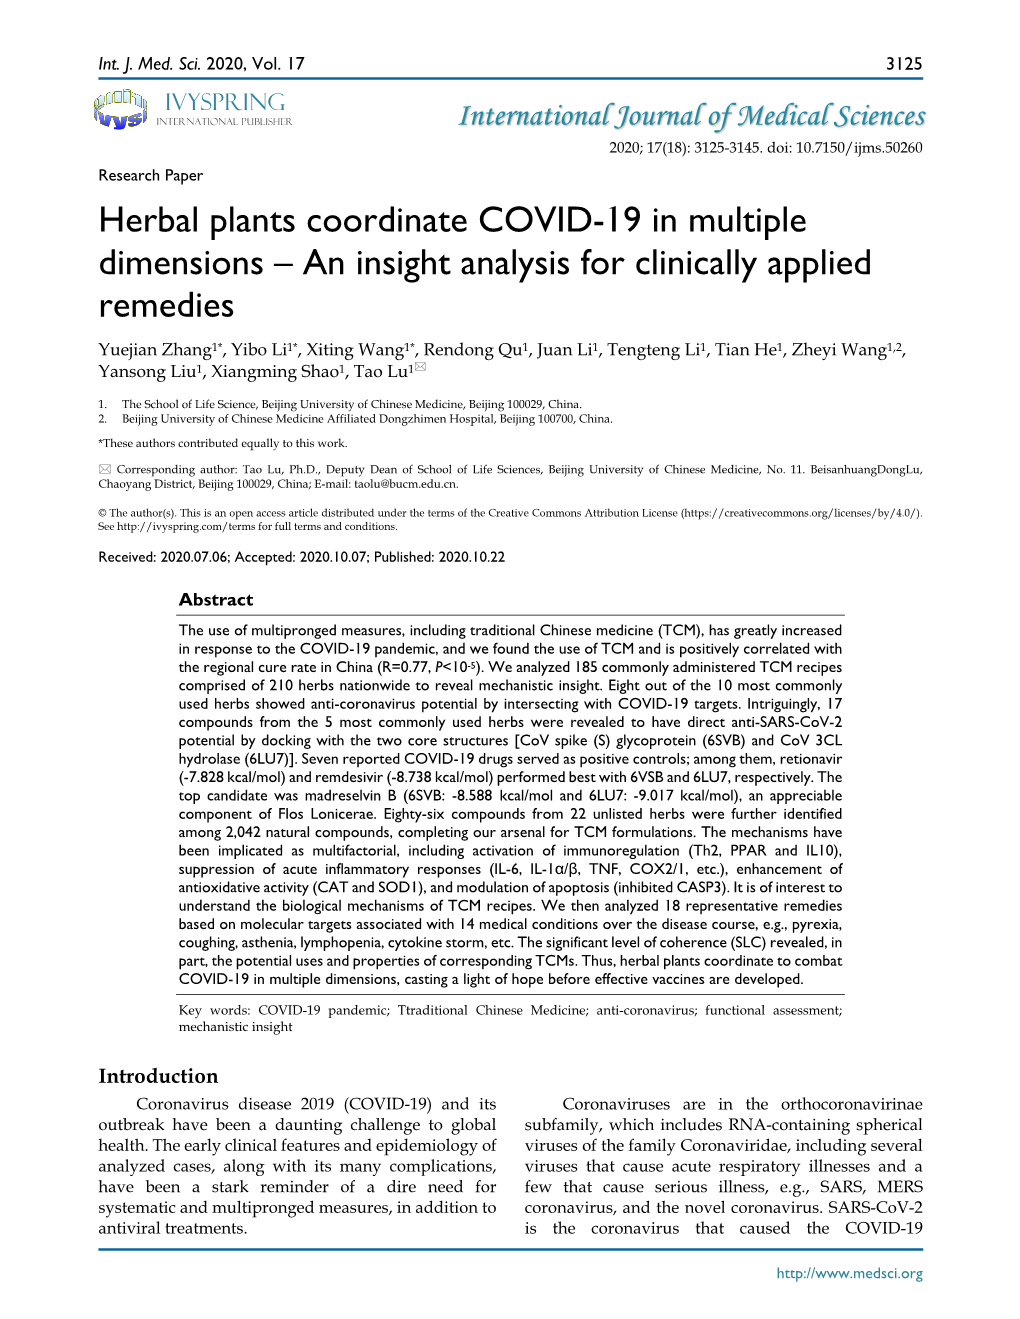 Herbal Plants Coordinate COVID-19 in Multiple Dimensions